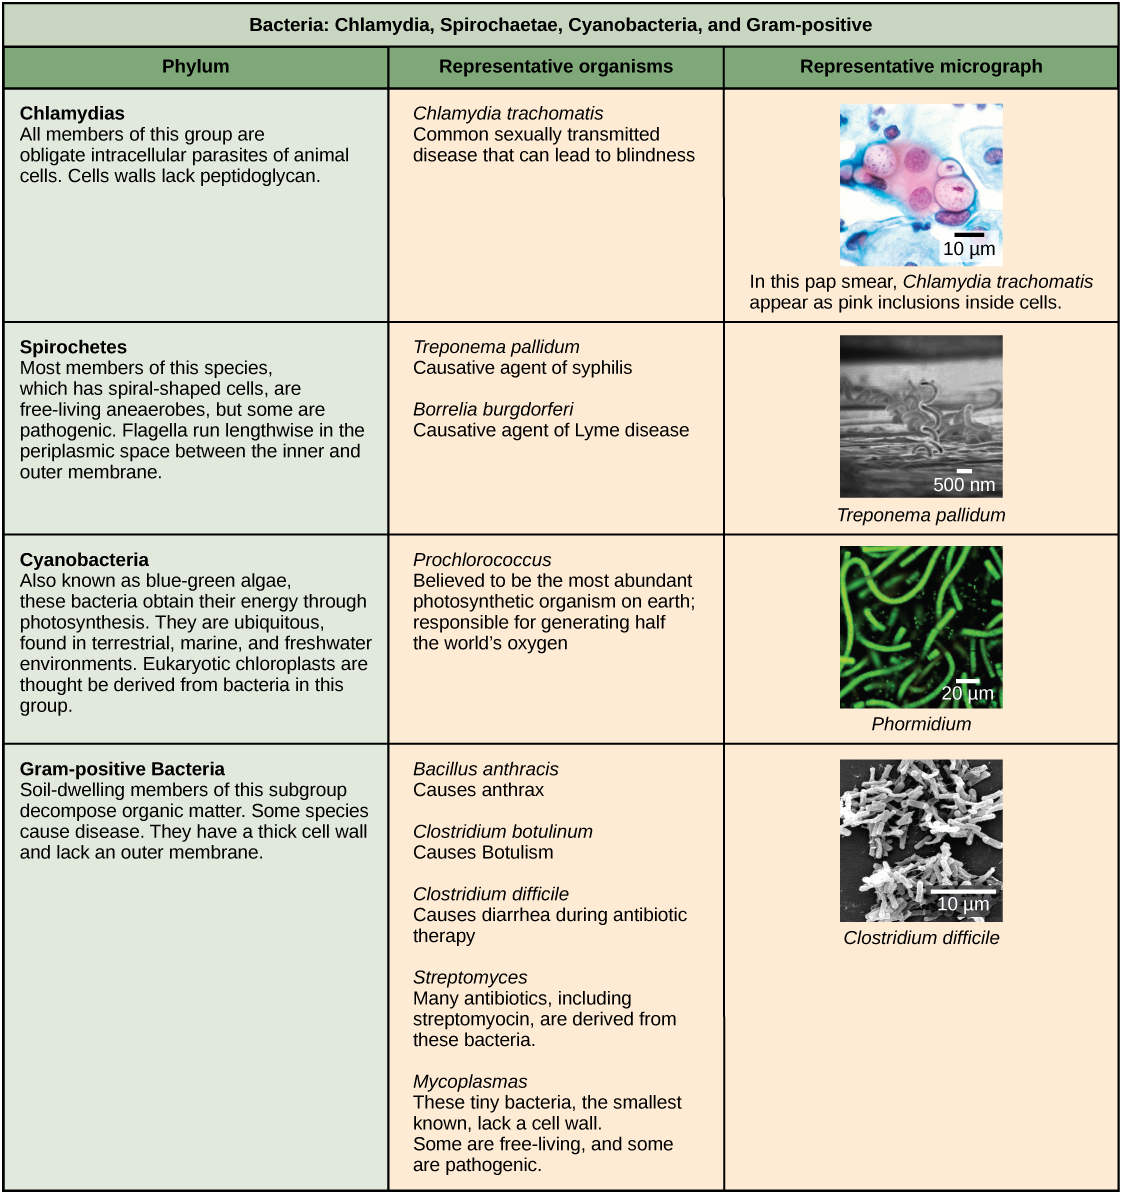 Other bacterial phyla. Chlamydia, Spirochetes, Cyanobacteria, and Gram-positive bacteria are described in this table. Note that bacterial shape is not phylum-dependent; bacteria within a phylum may be cocci, rod-shaped, or spiral.